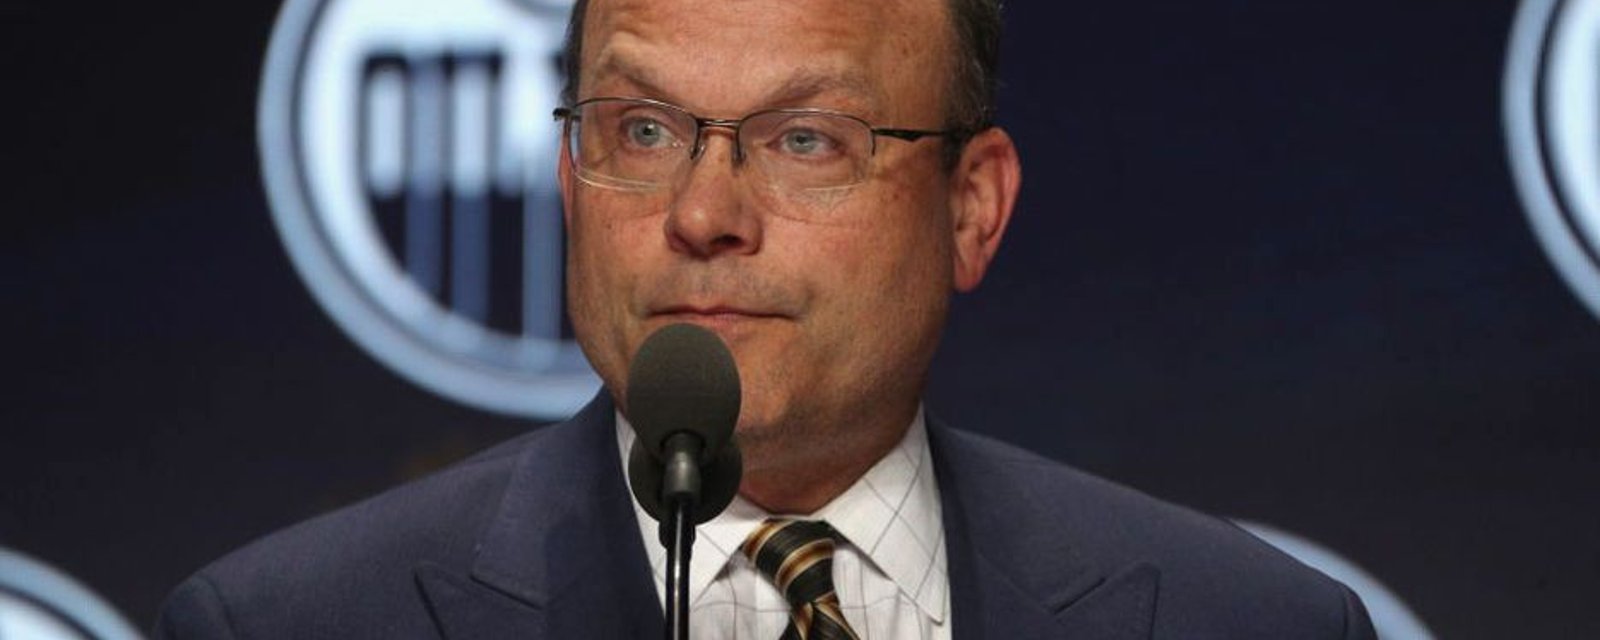 Burke shares heartbreaking reality of Chiarelli's situation following his firing...